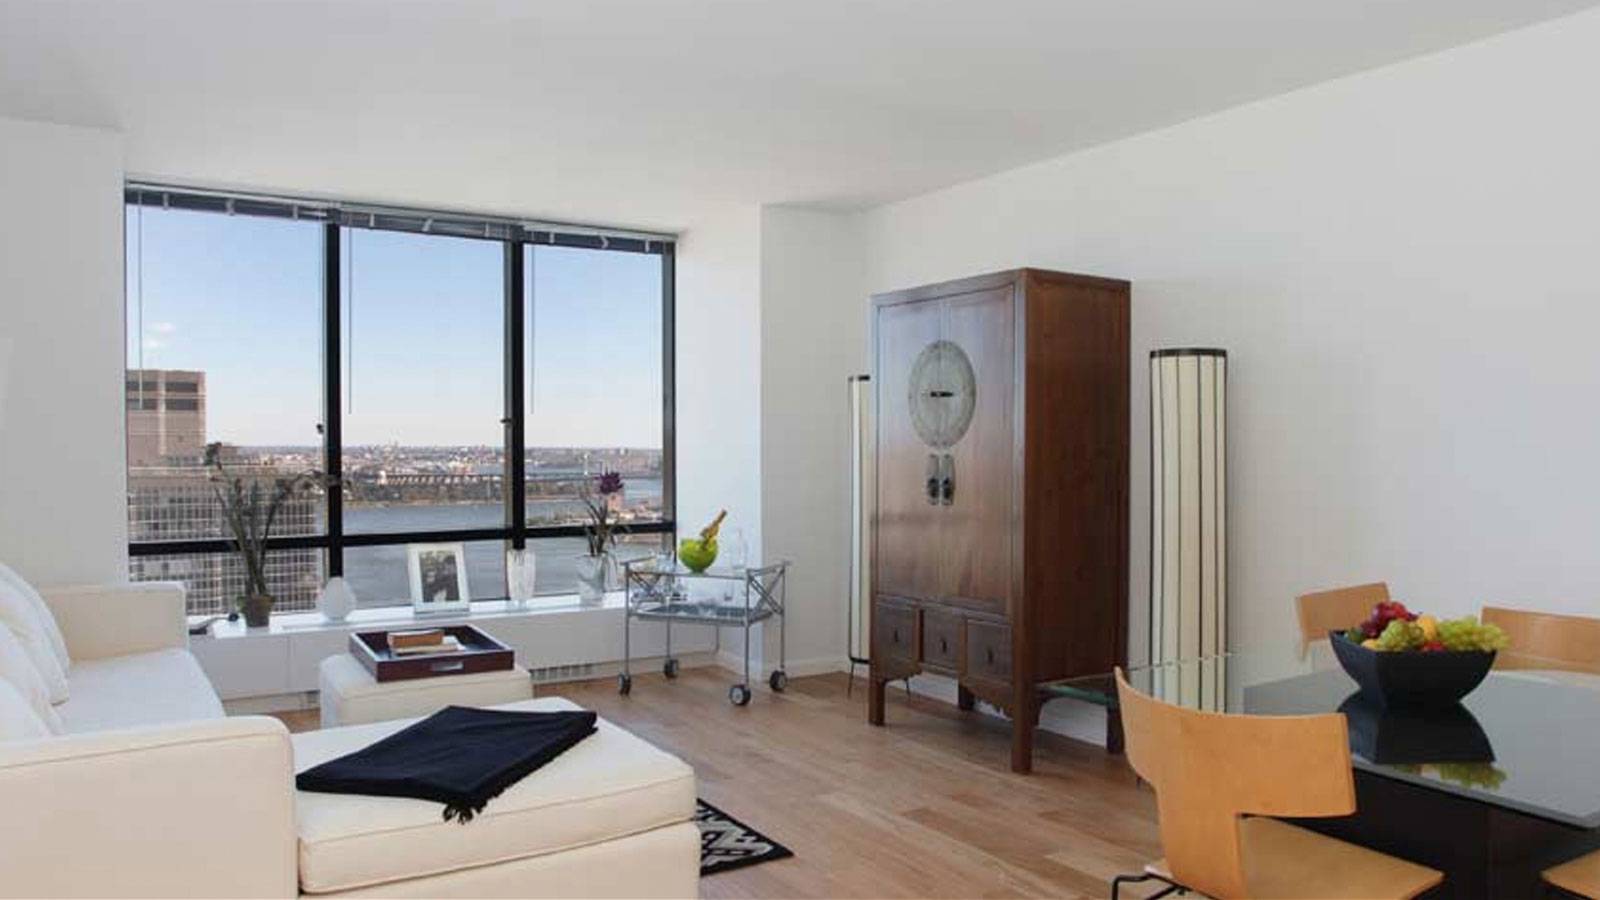 Spectacular 1 Bedroom with stunning views of the East River. Upper East Side. NO FEE!!